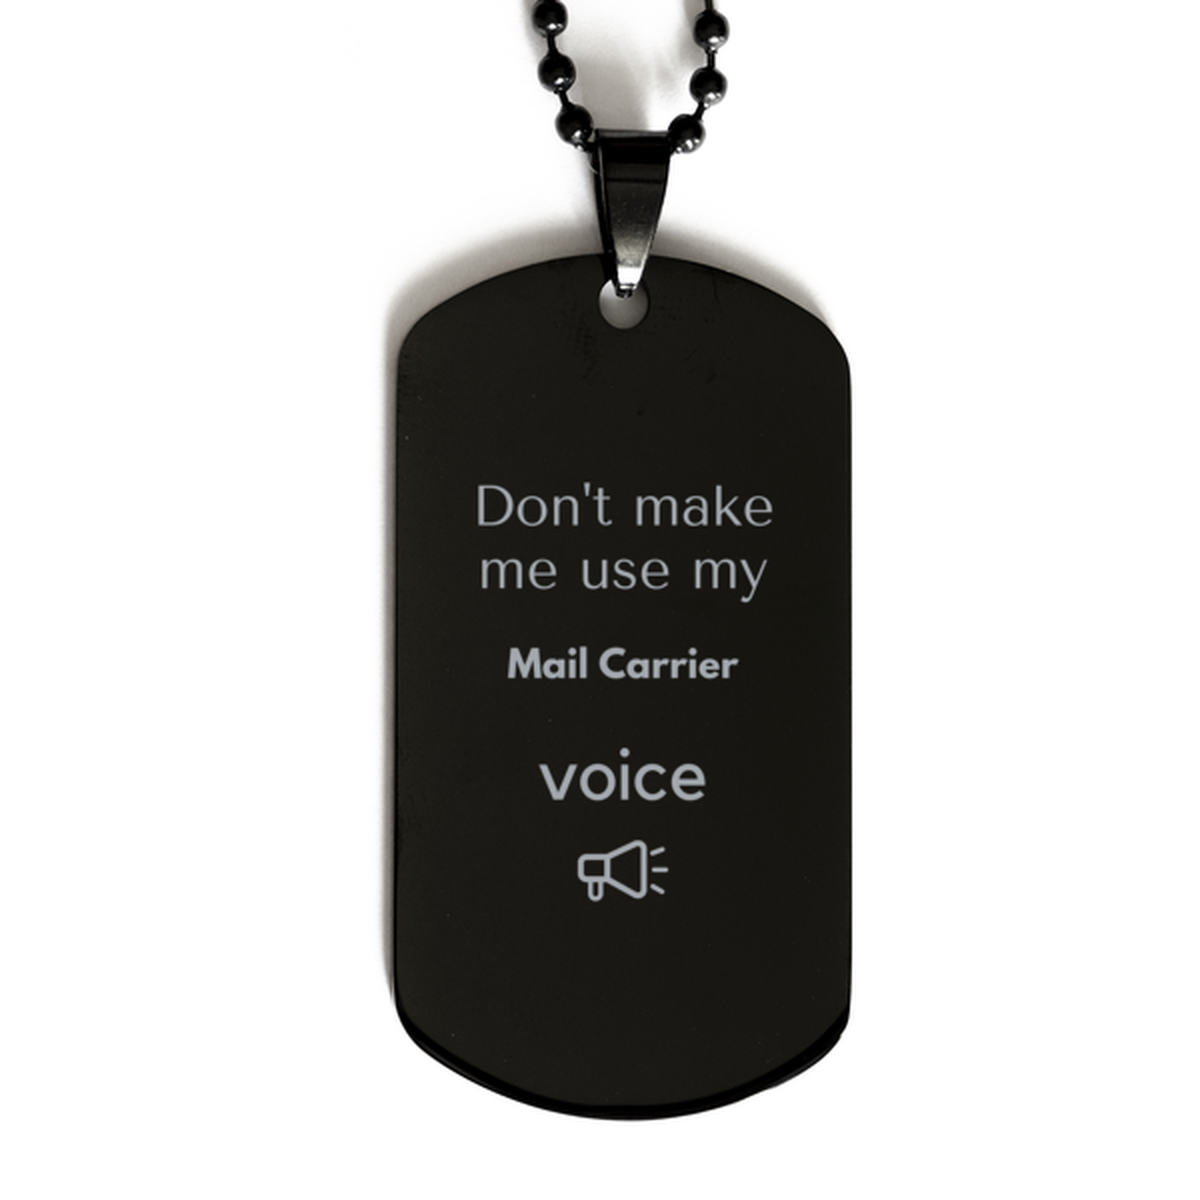 Don't make me use my Mail Carrier voice, Sarcasm Mail Carrier Gifts, Christmas Mail Carrier Black Dog Tag Birthday Unique Gifts For Mail Carrier Coworkers, Men, Women, Colleague, Friends